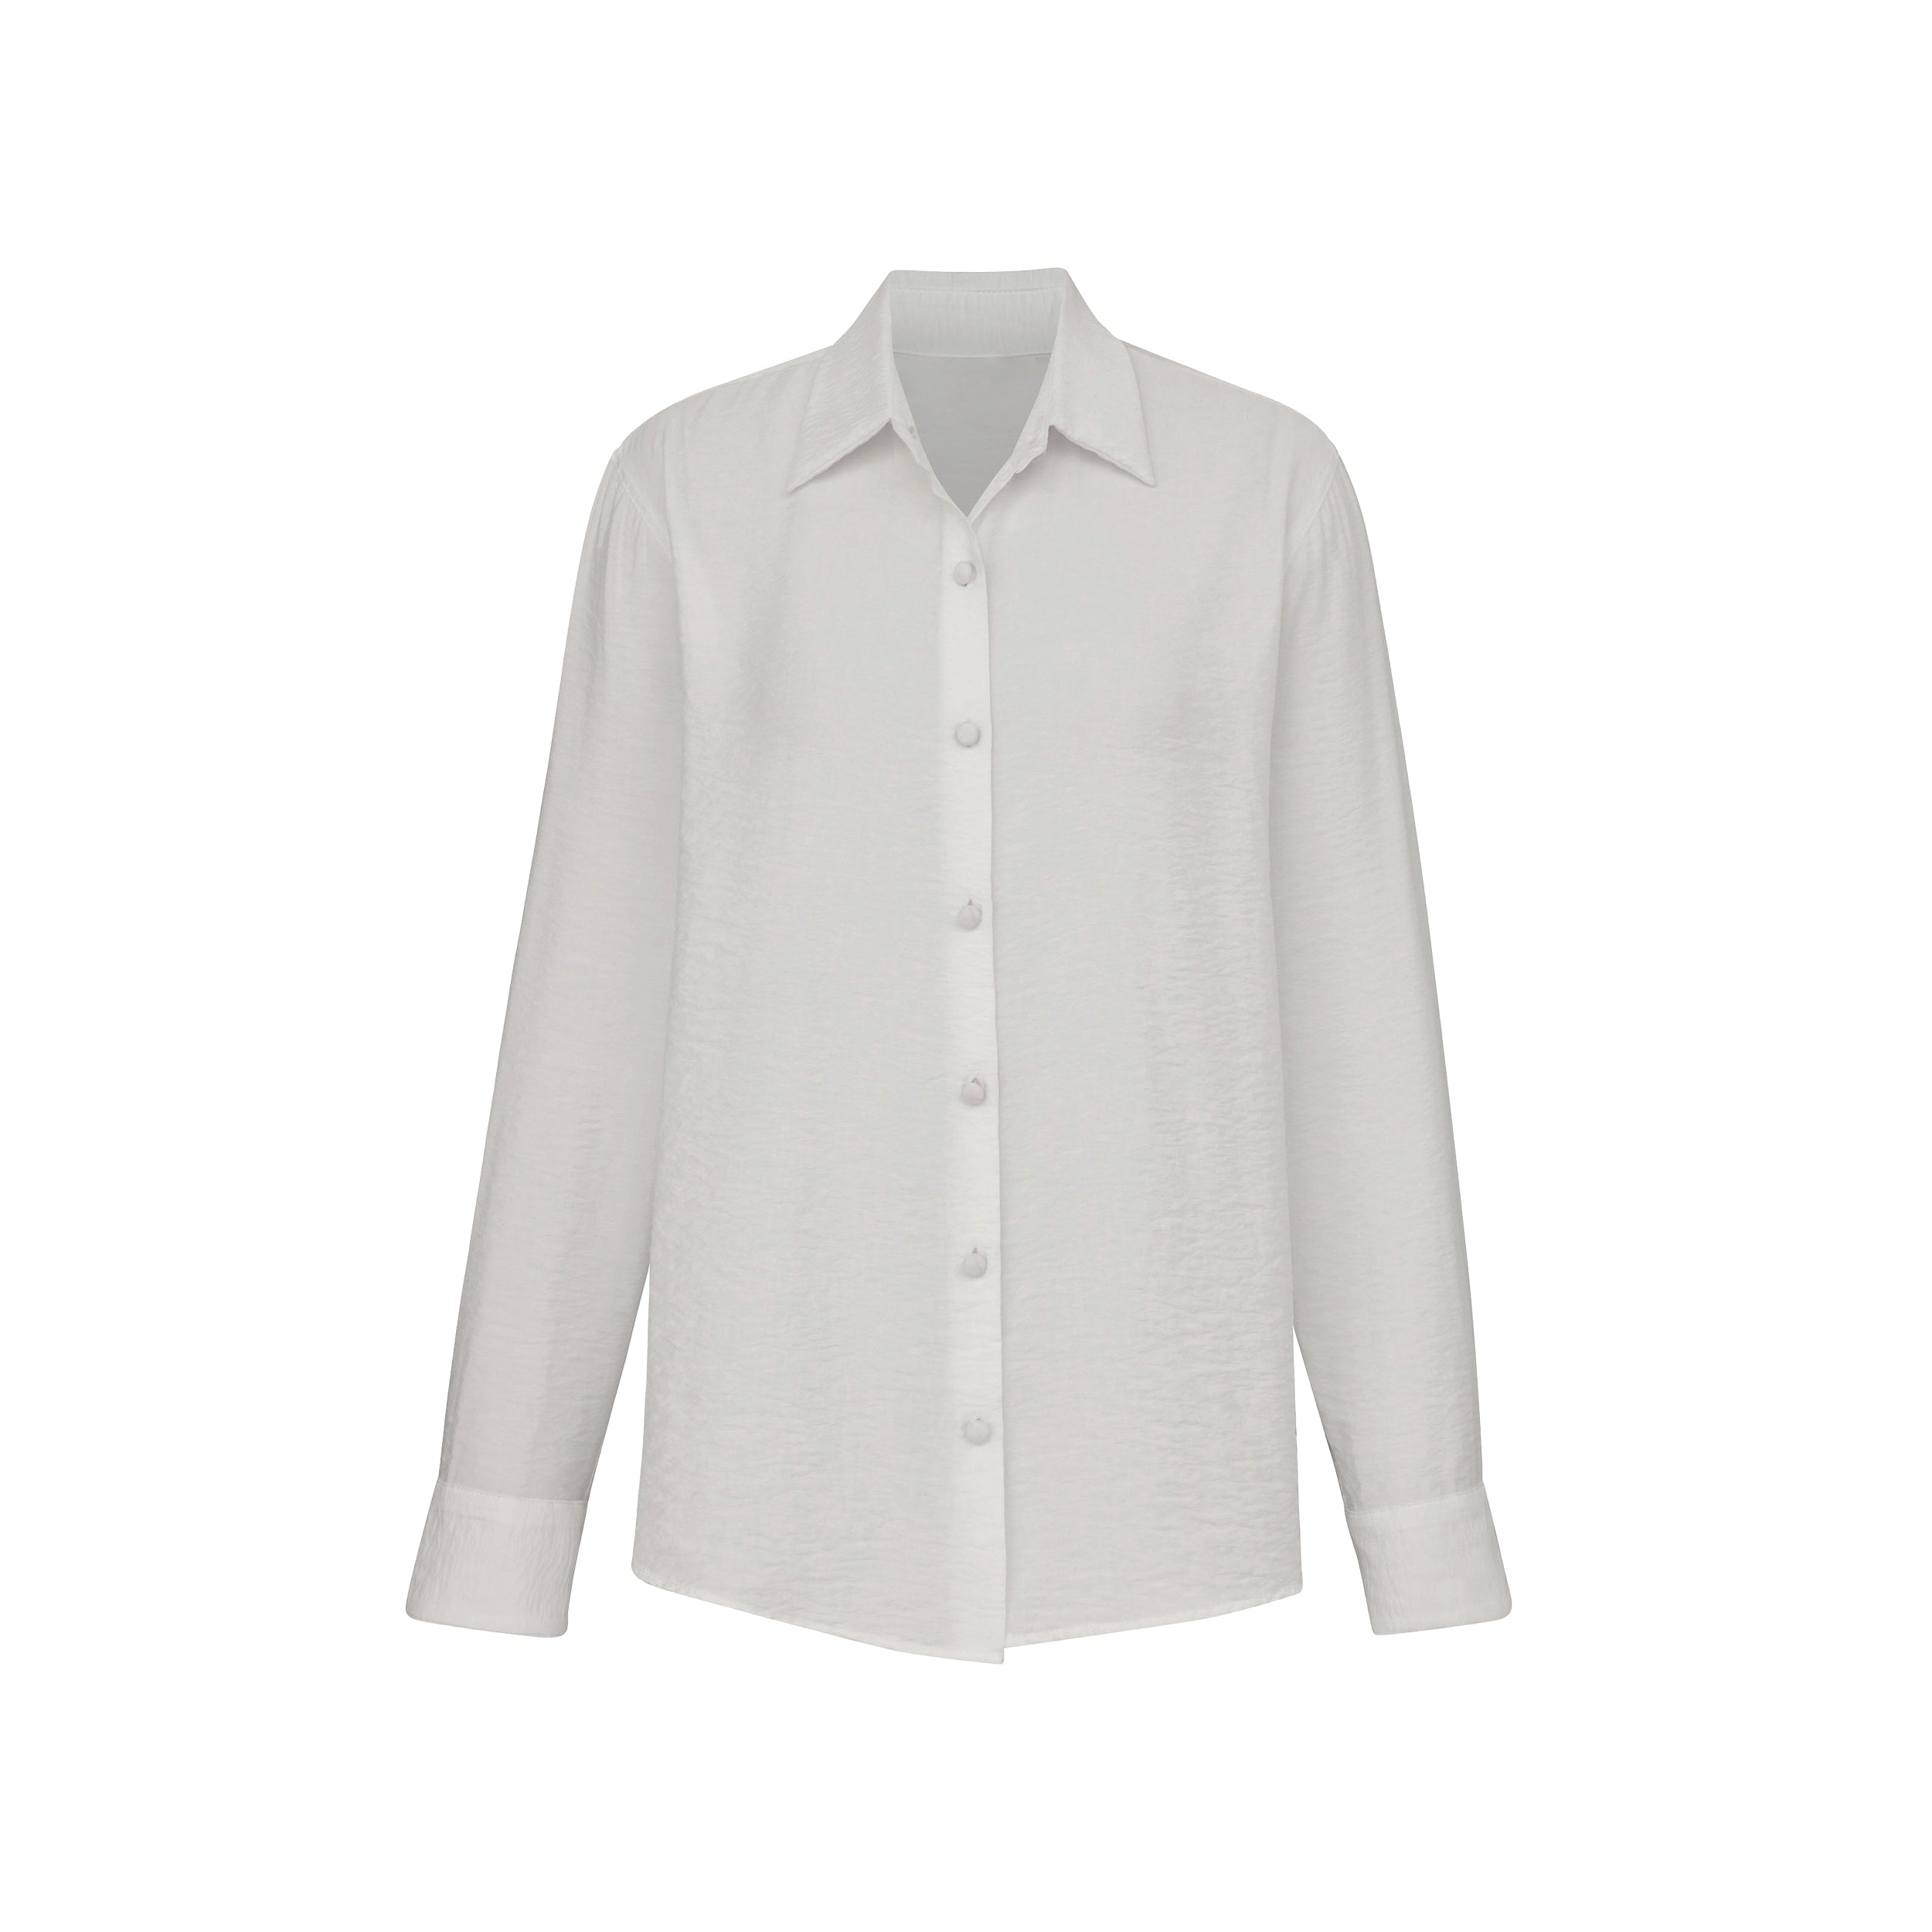 Standalone product shot of sheer and textured button up long sleeve shirt.